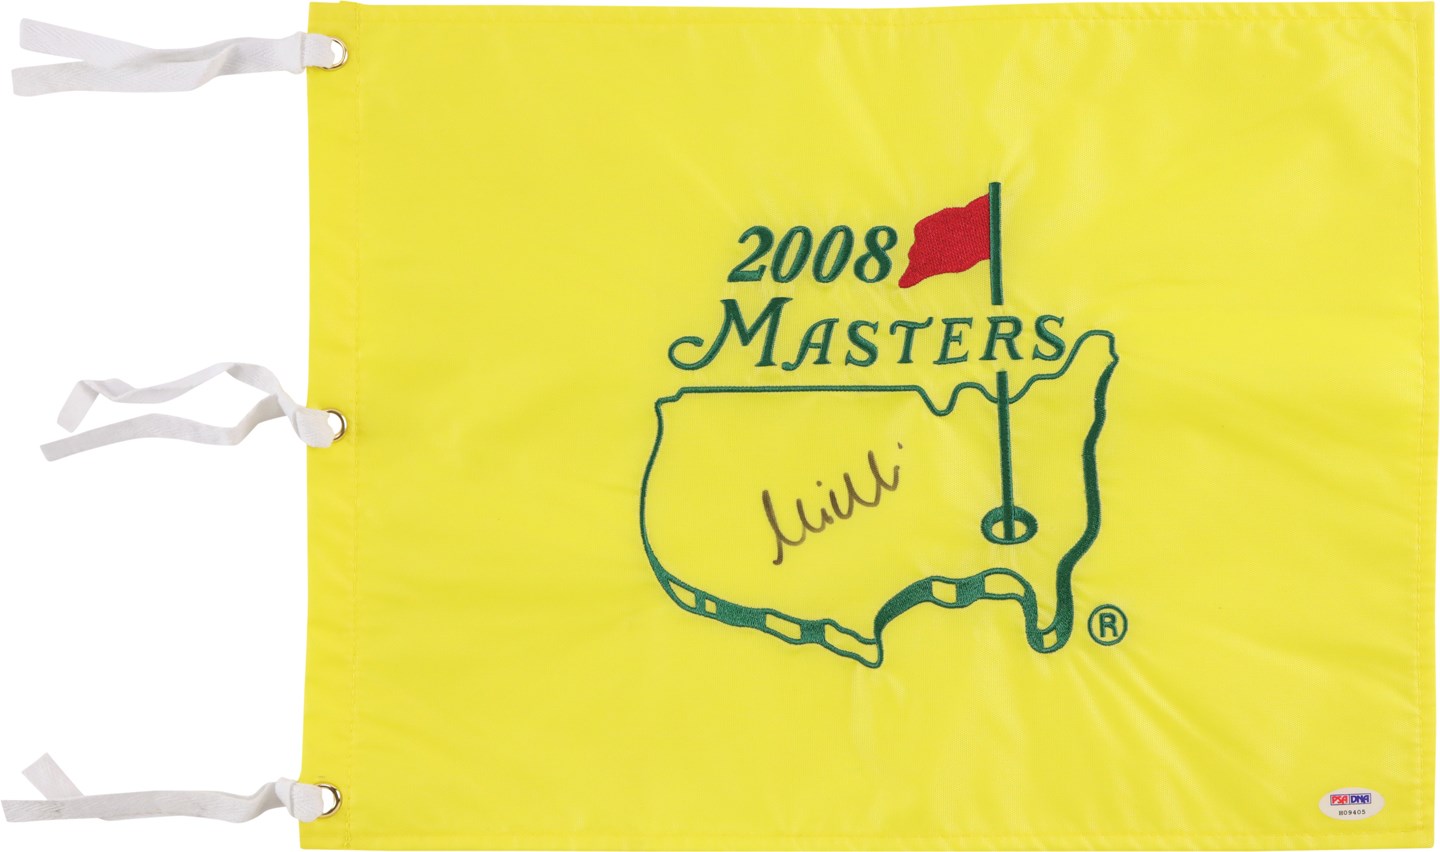 Olympics and All Sports - Mike Weir Signed 2008 Masters Flag (PSA)